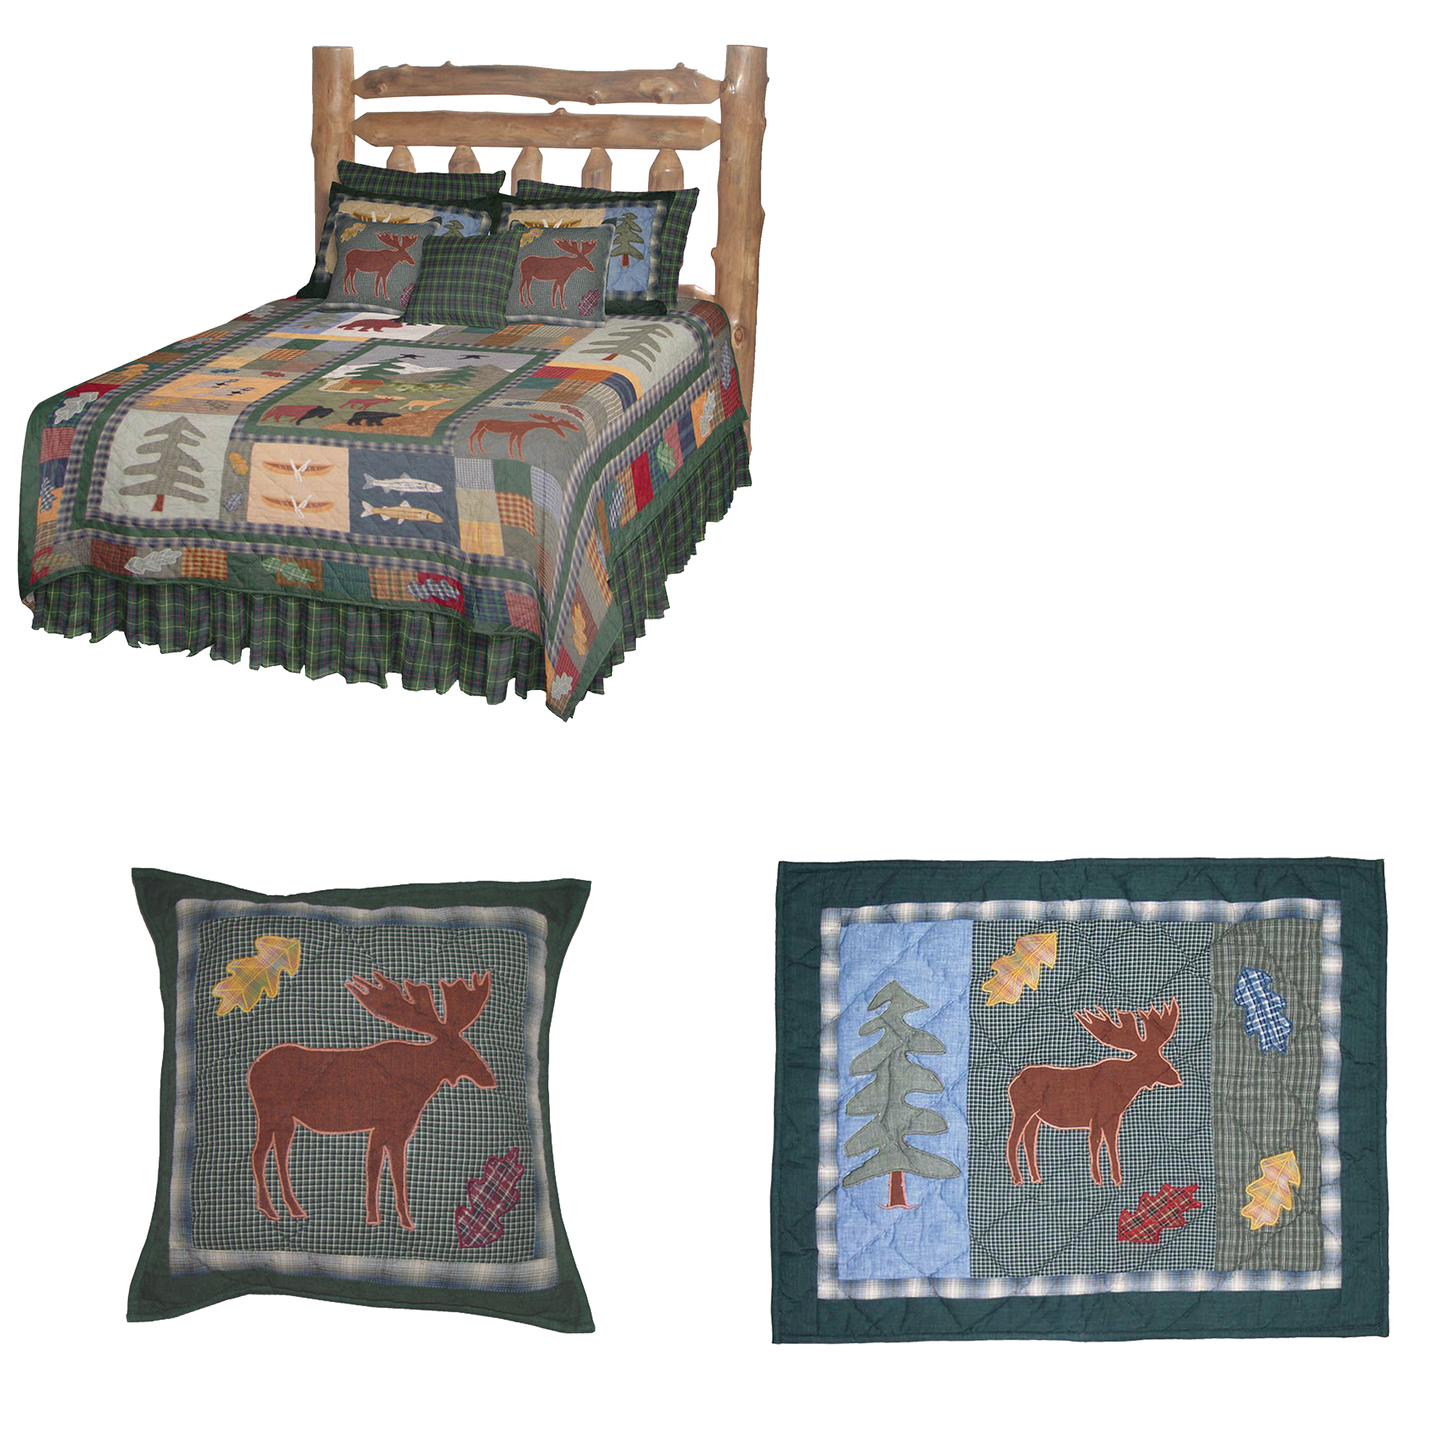 Up North Woods Bedding accessories and Ensemble sets.